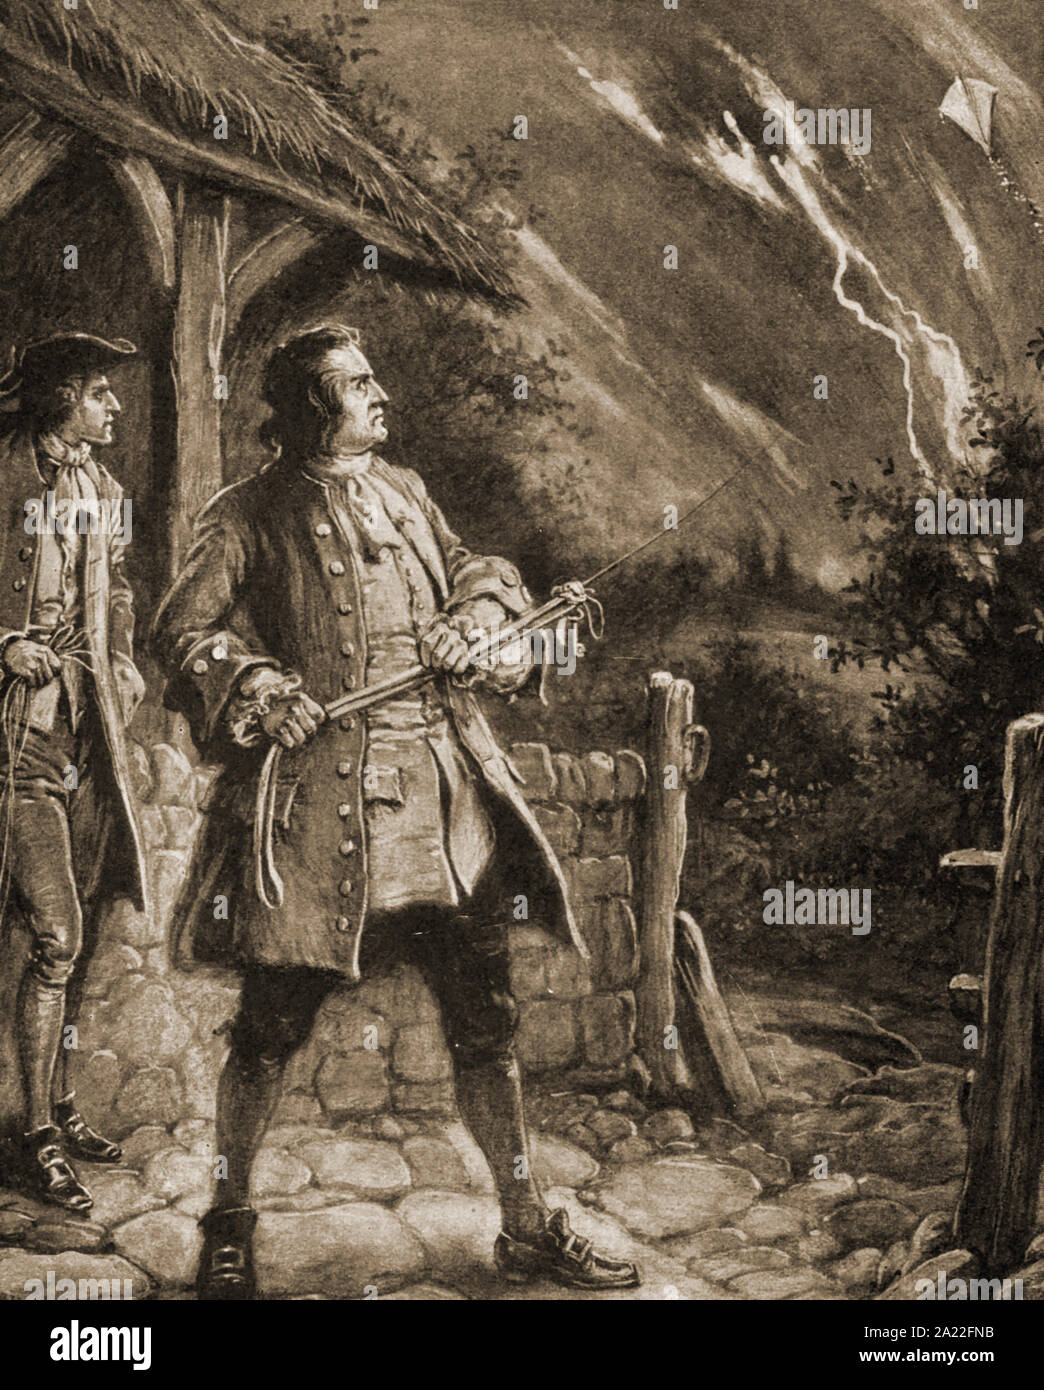 1936 illustration of Benjamin Frankland flying a kite in a thunderstorm. Franklin, a polymath, was a founding father of the USA and was at various times  an inventor (e.g. lightning rod & bifocal spectacles) , humorist, printer, journalist, author, statesman, civic activist, diplomat, writer, printer, political philosopher, politician, Freemason, postmaster, scientist, Stock Photo